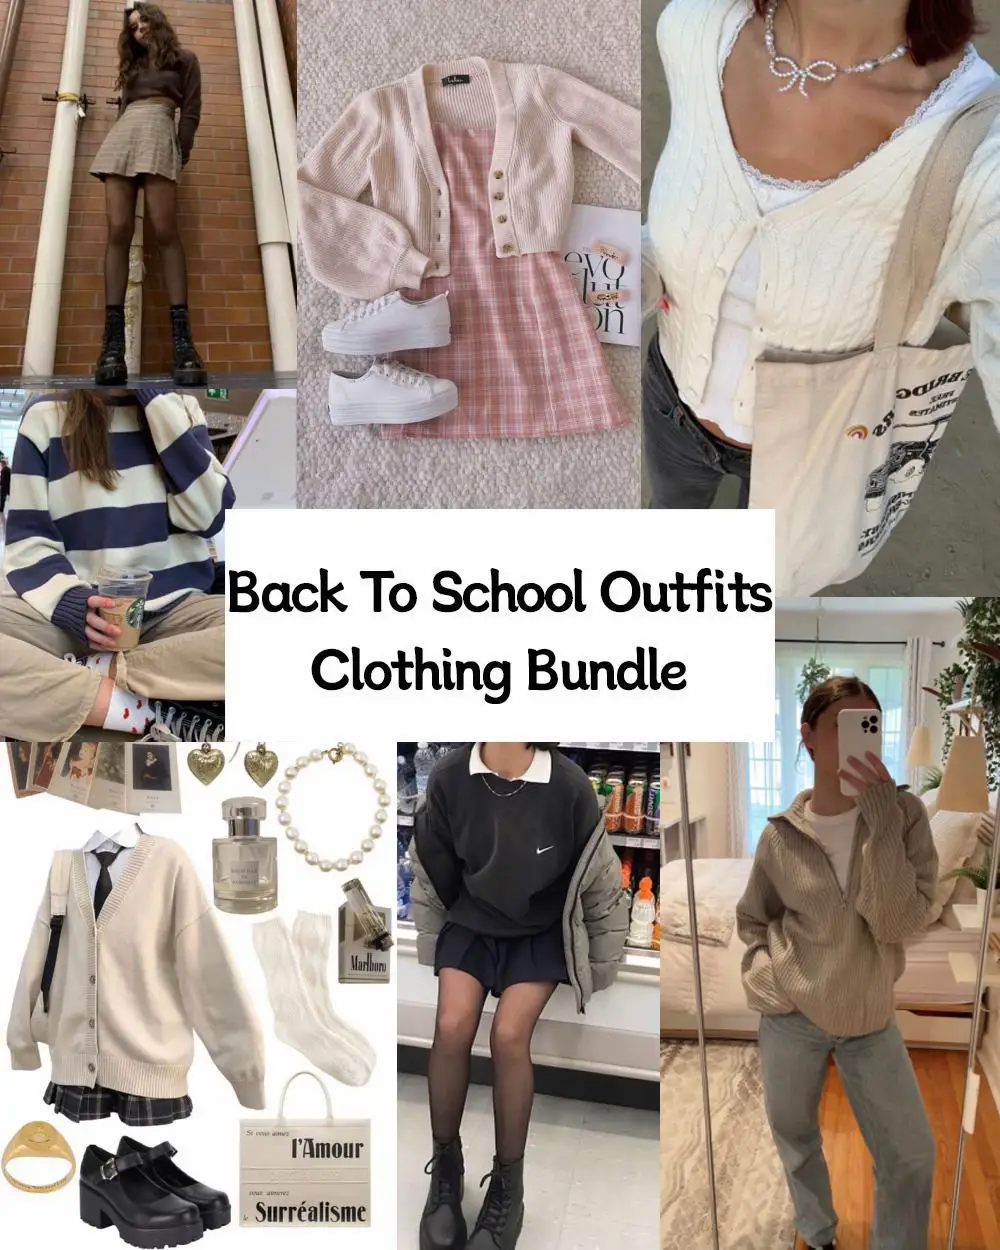 Back To School Outfits Clothing Bundle